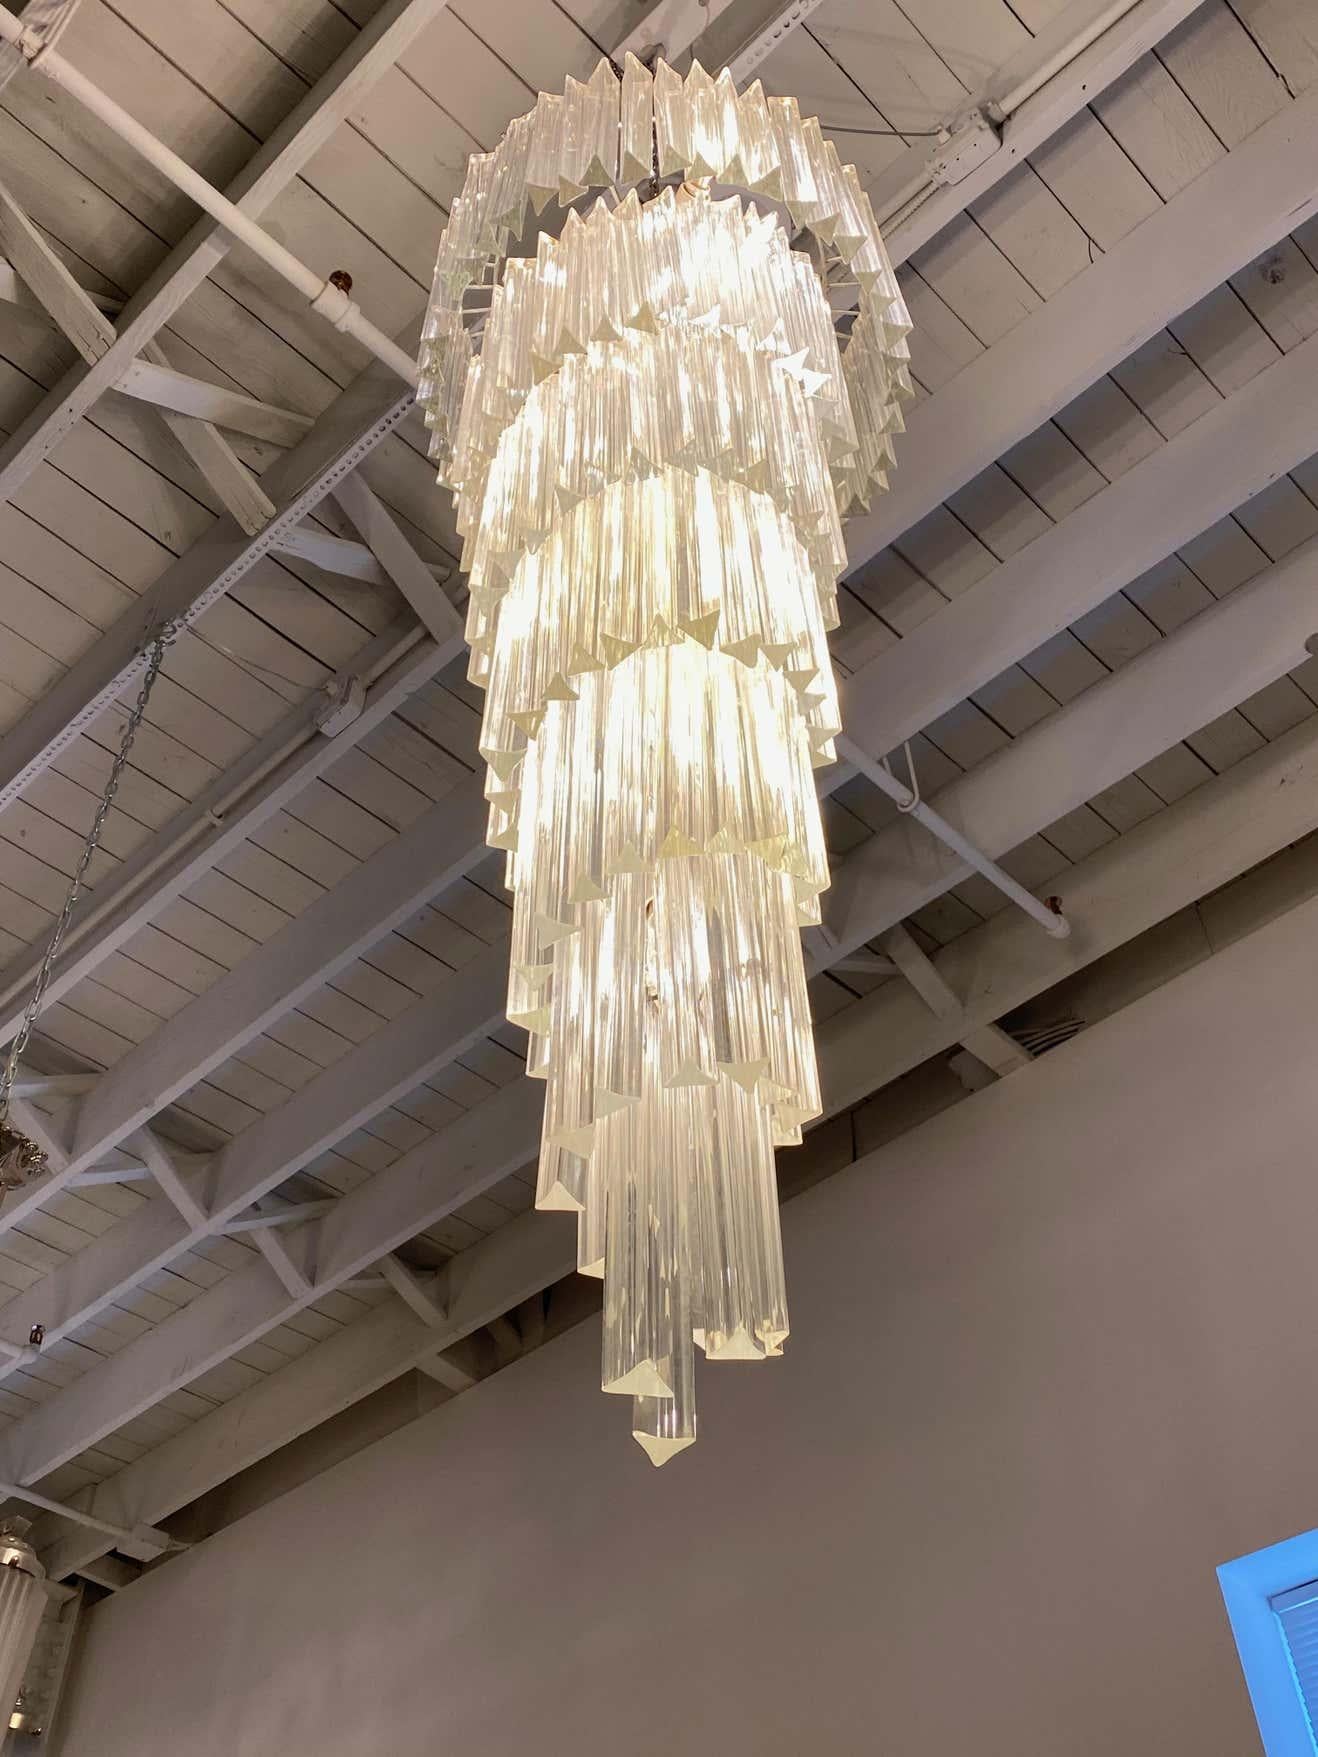 Stunning Mid-Century Modern Italian spiral chandelier. Each of the prisms are solid glass. They hang from hooks onto a spiral nickel (silver) frame, as pictured. Any amount of chain can be added for custom hanging length of the chandelier. Has been